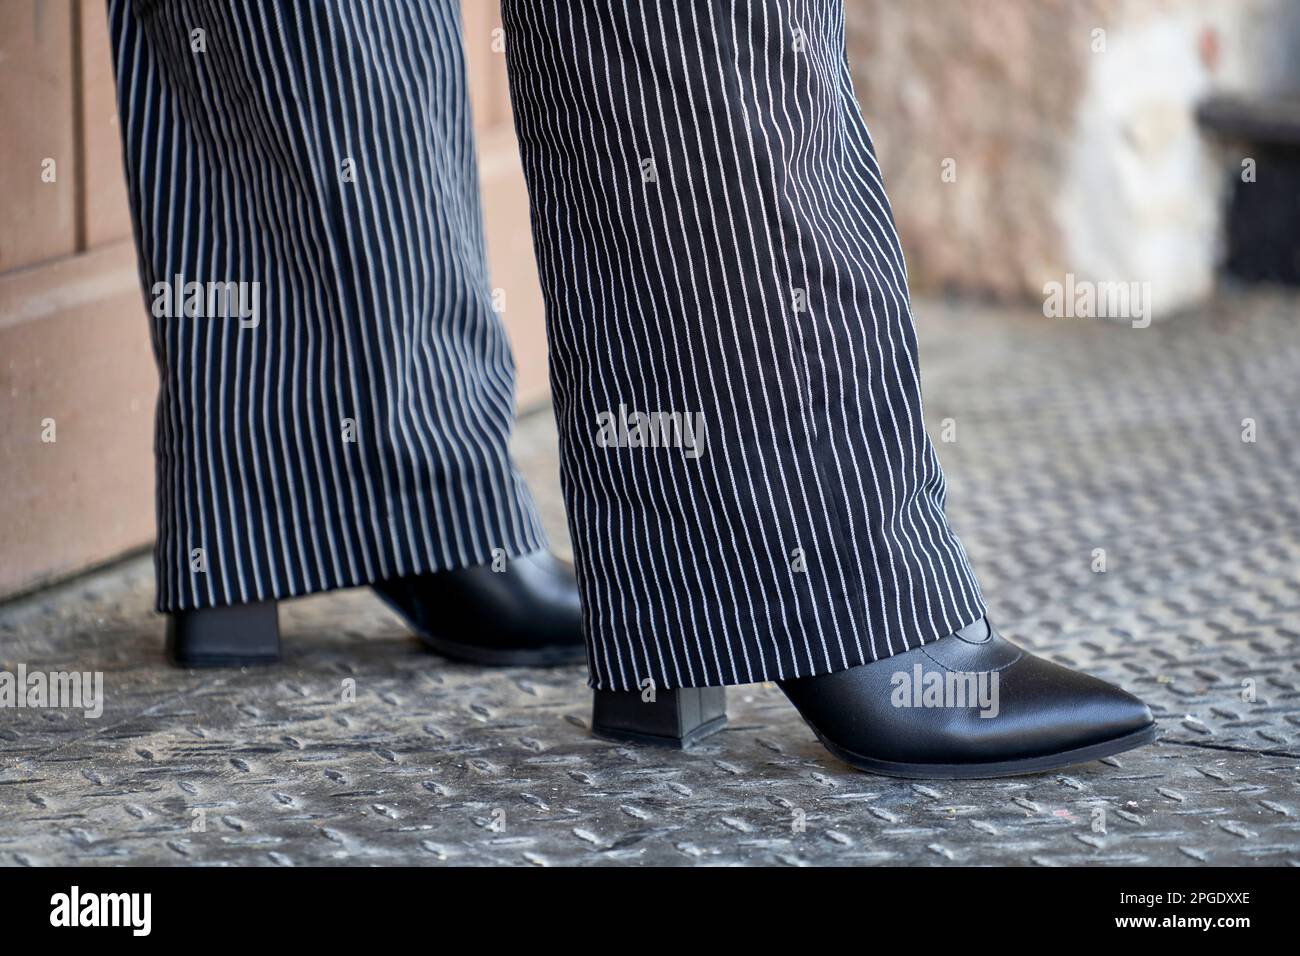 Woman's legs in stripped pants and closed black shoes Stock Photo